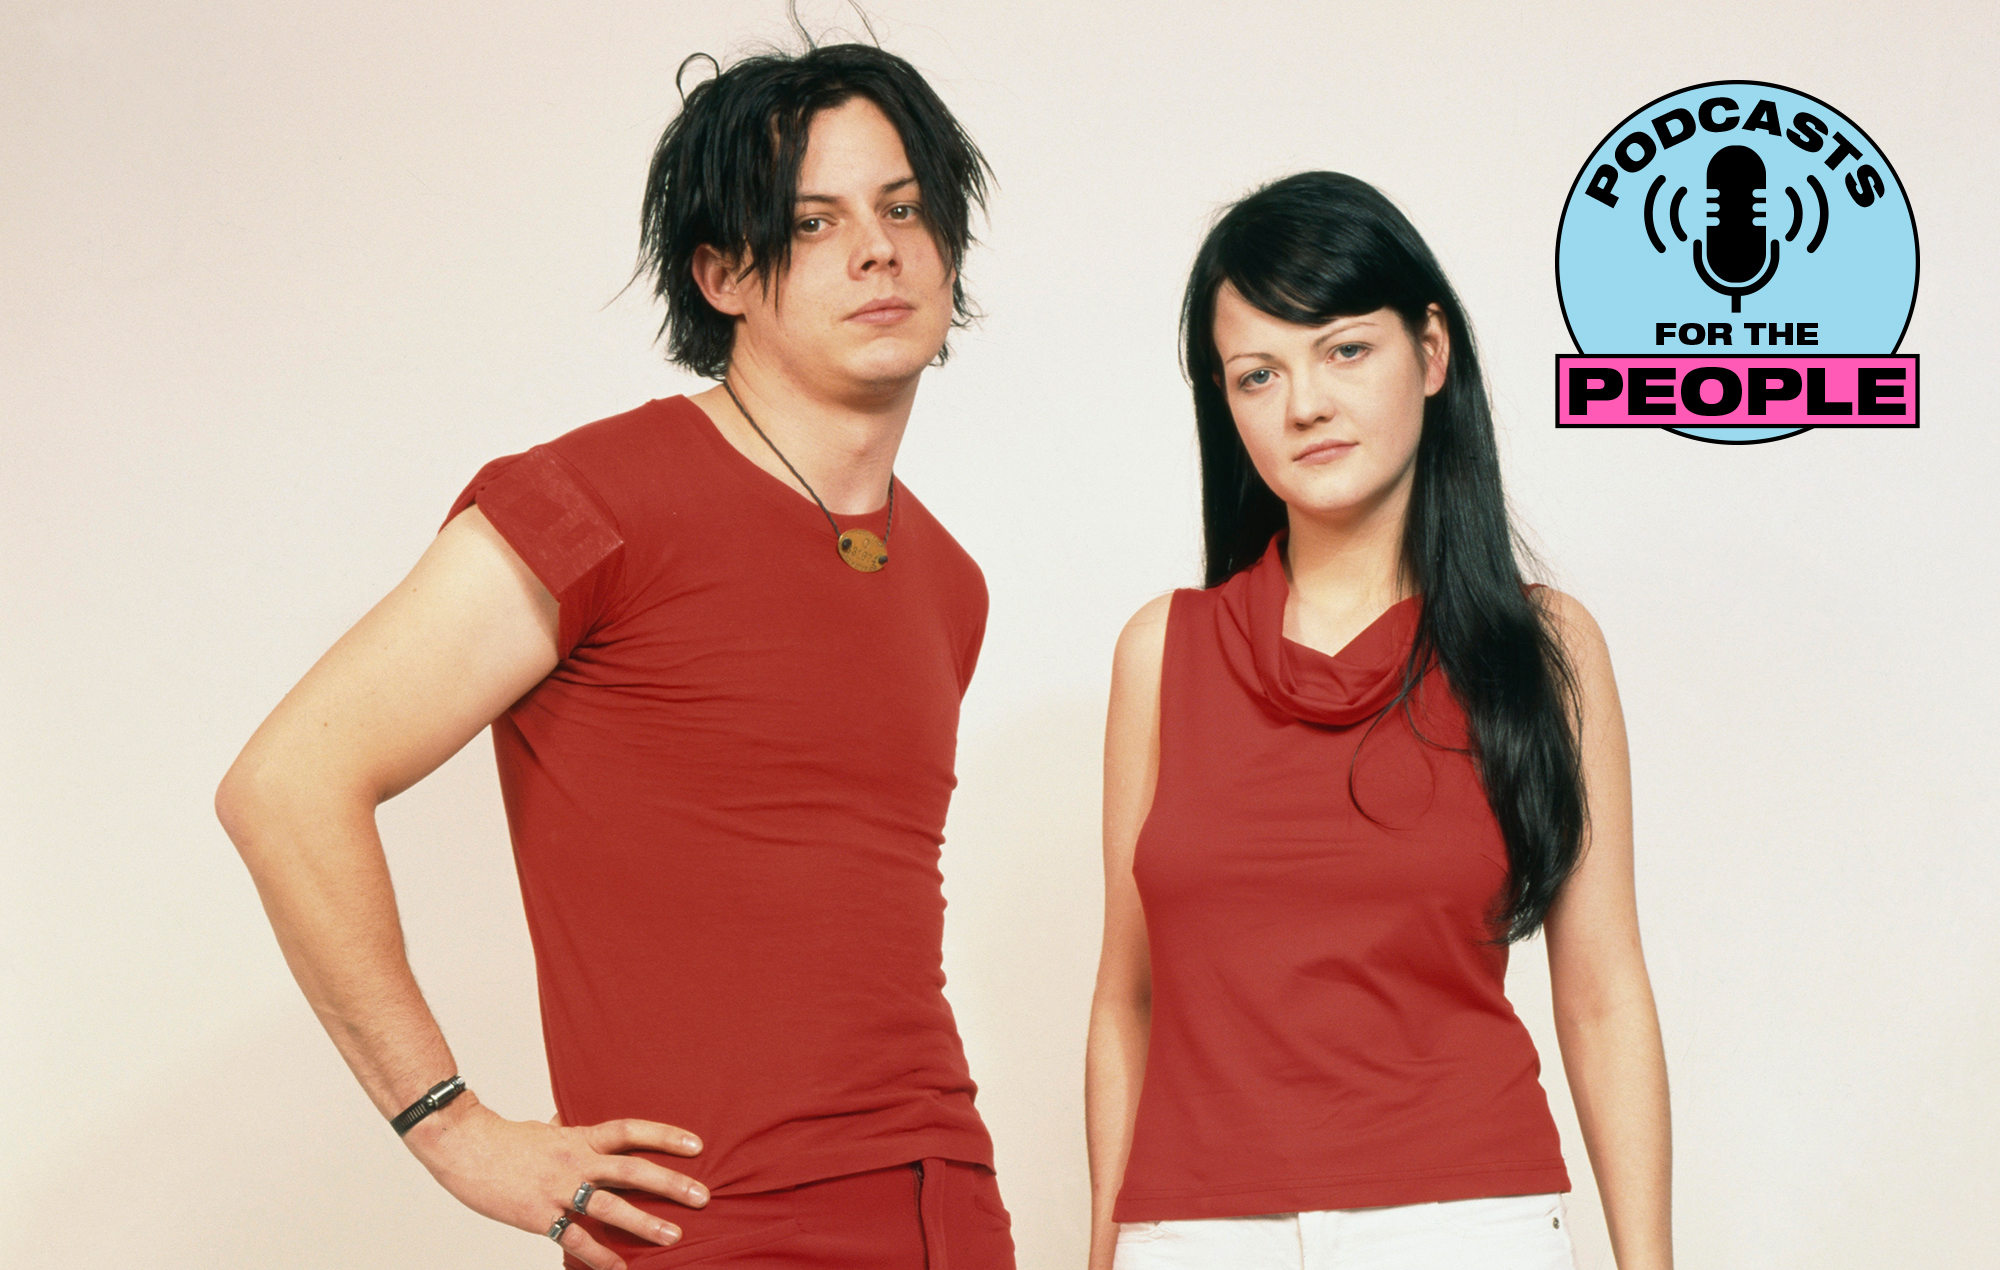 Greg Cochrane’s Podcasts For The People #7 – The White Stripes, roadlife with Vampire Weekend and filthy agony aunts